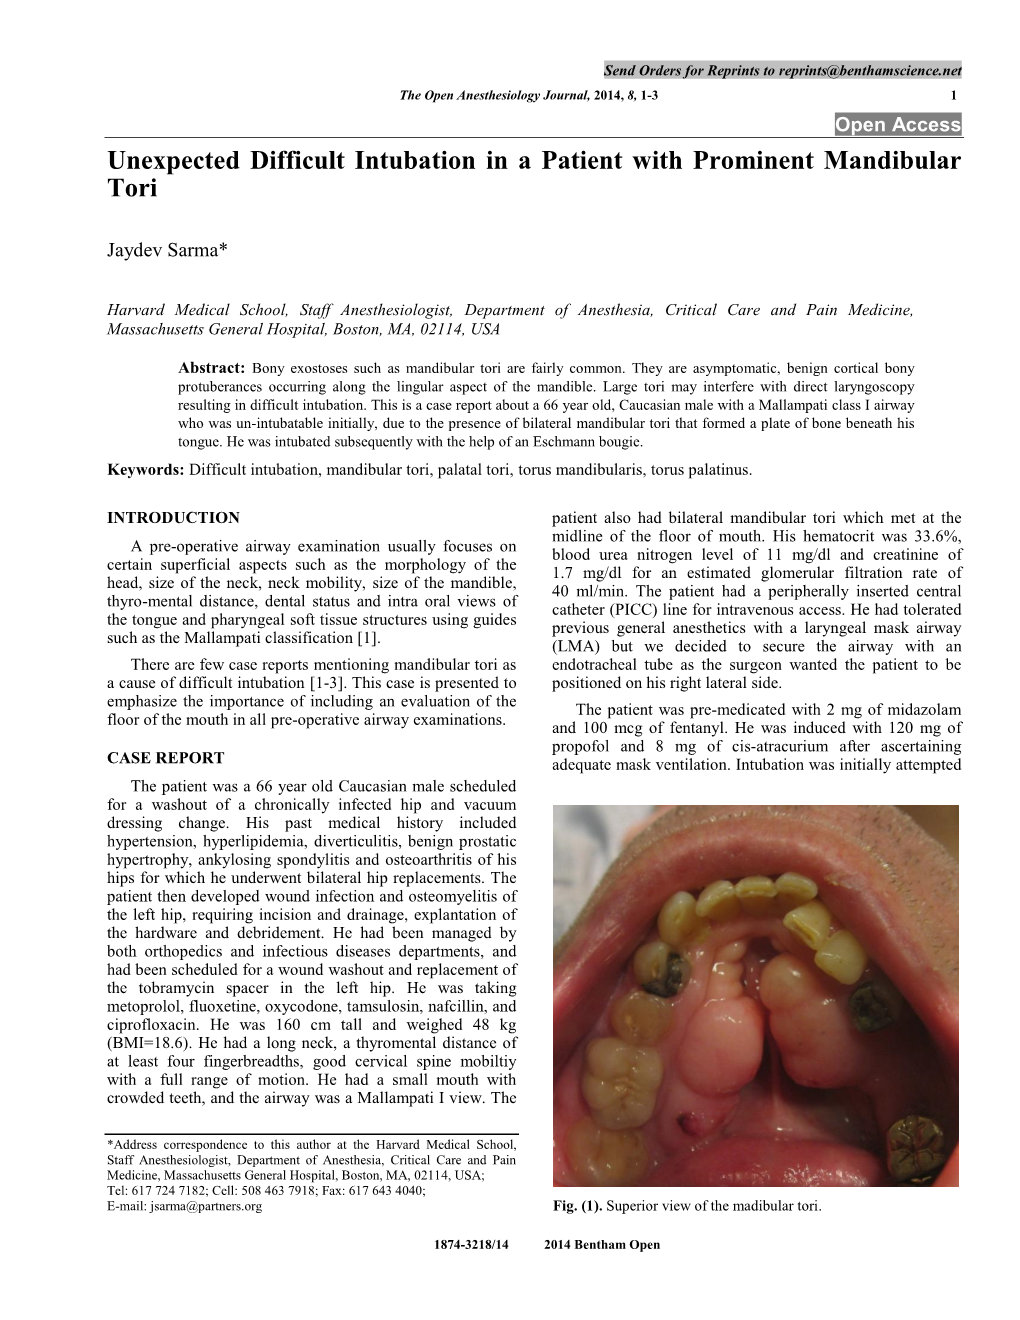 Difficult Intubation in Case of a Patient with Prominent Mandibular Tori